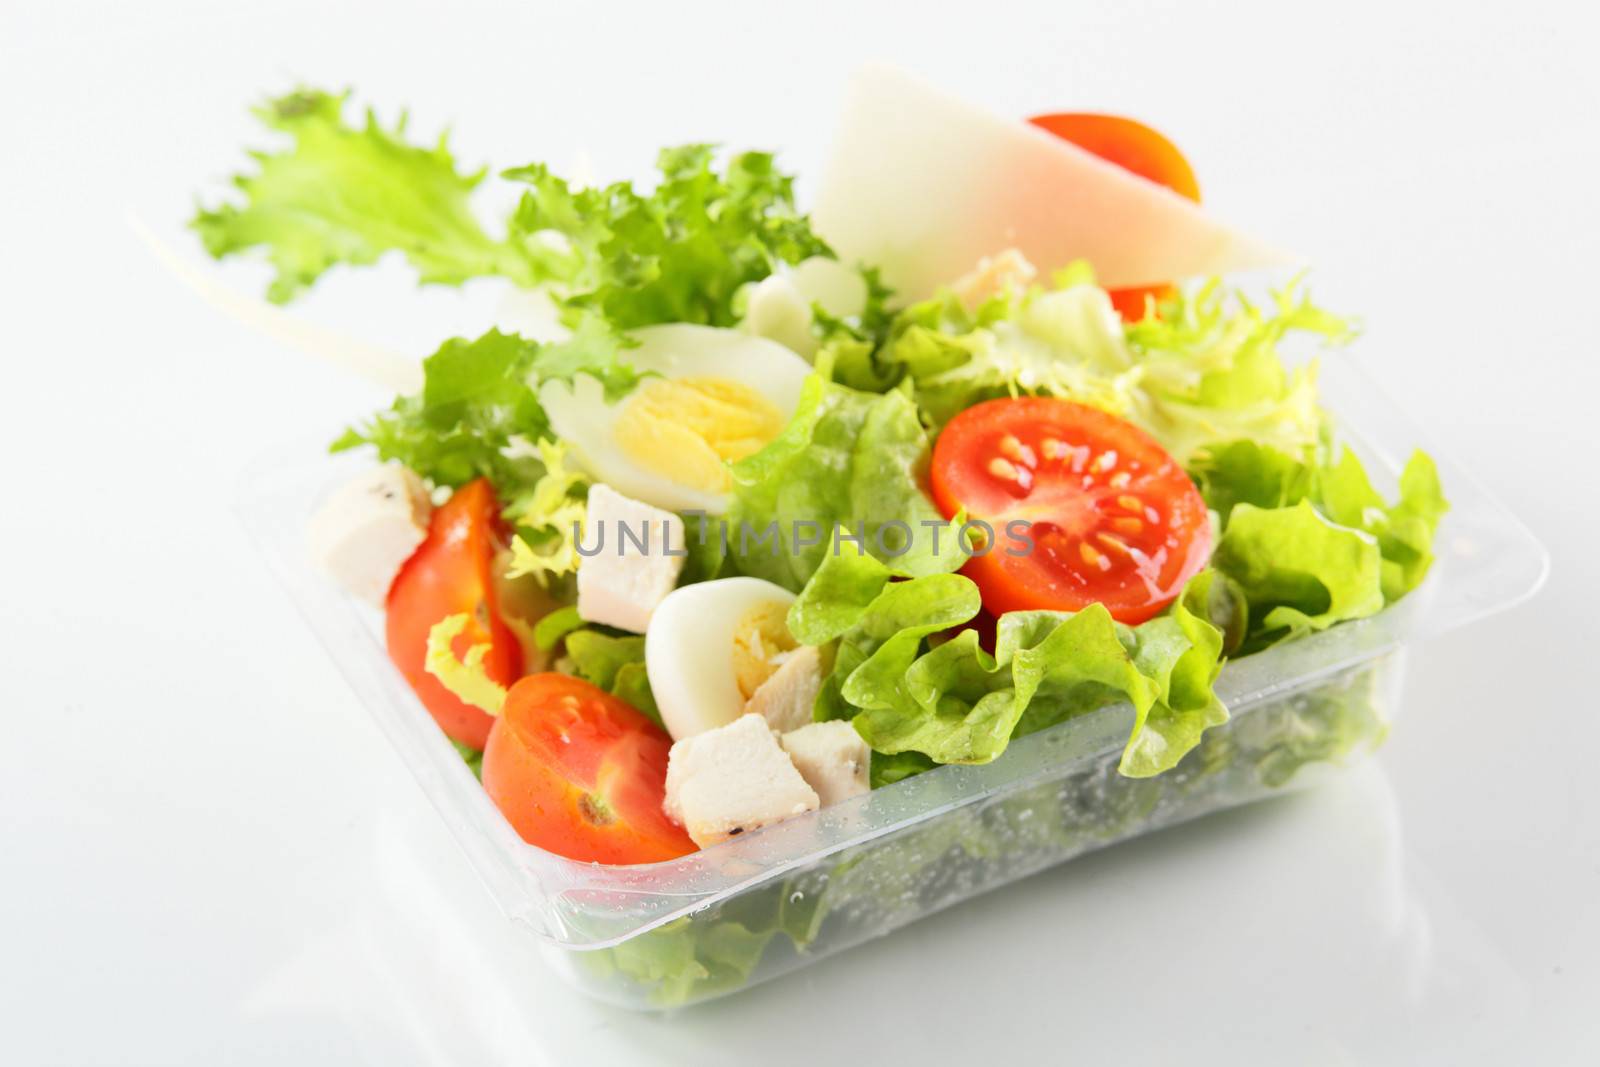 fresh summer salad on white background by fiphoto